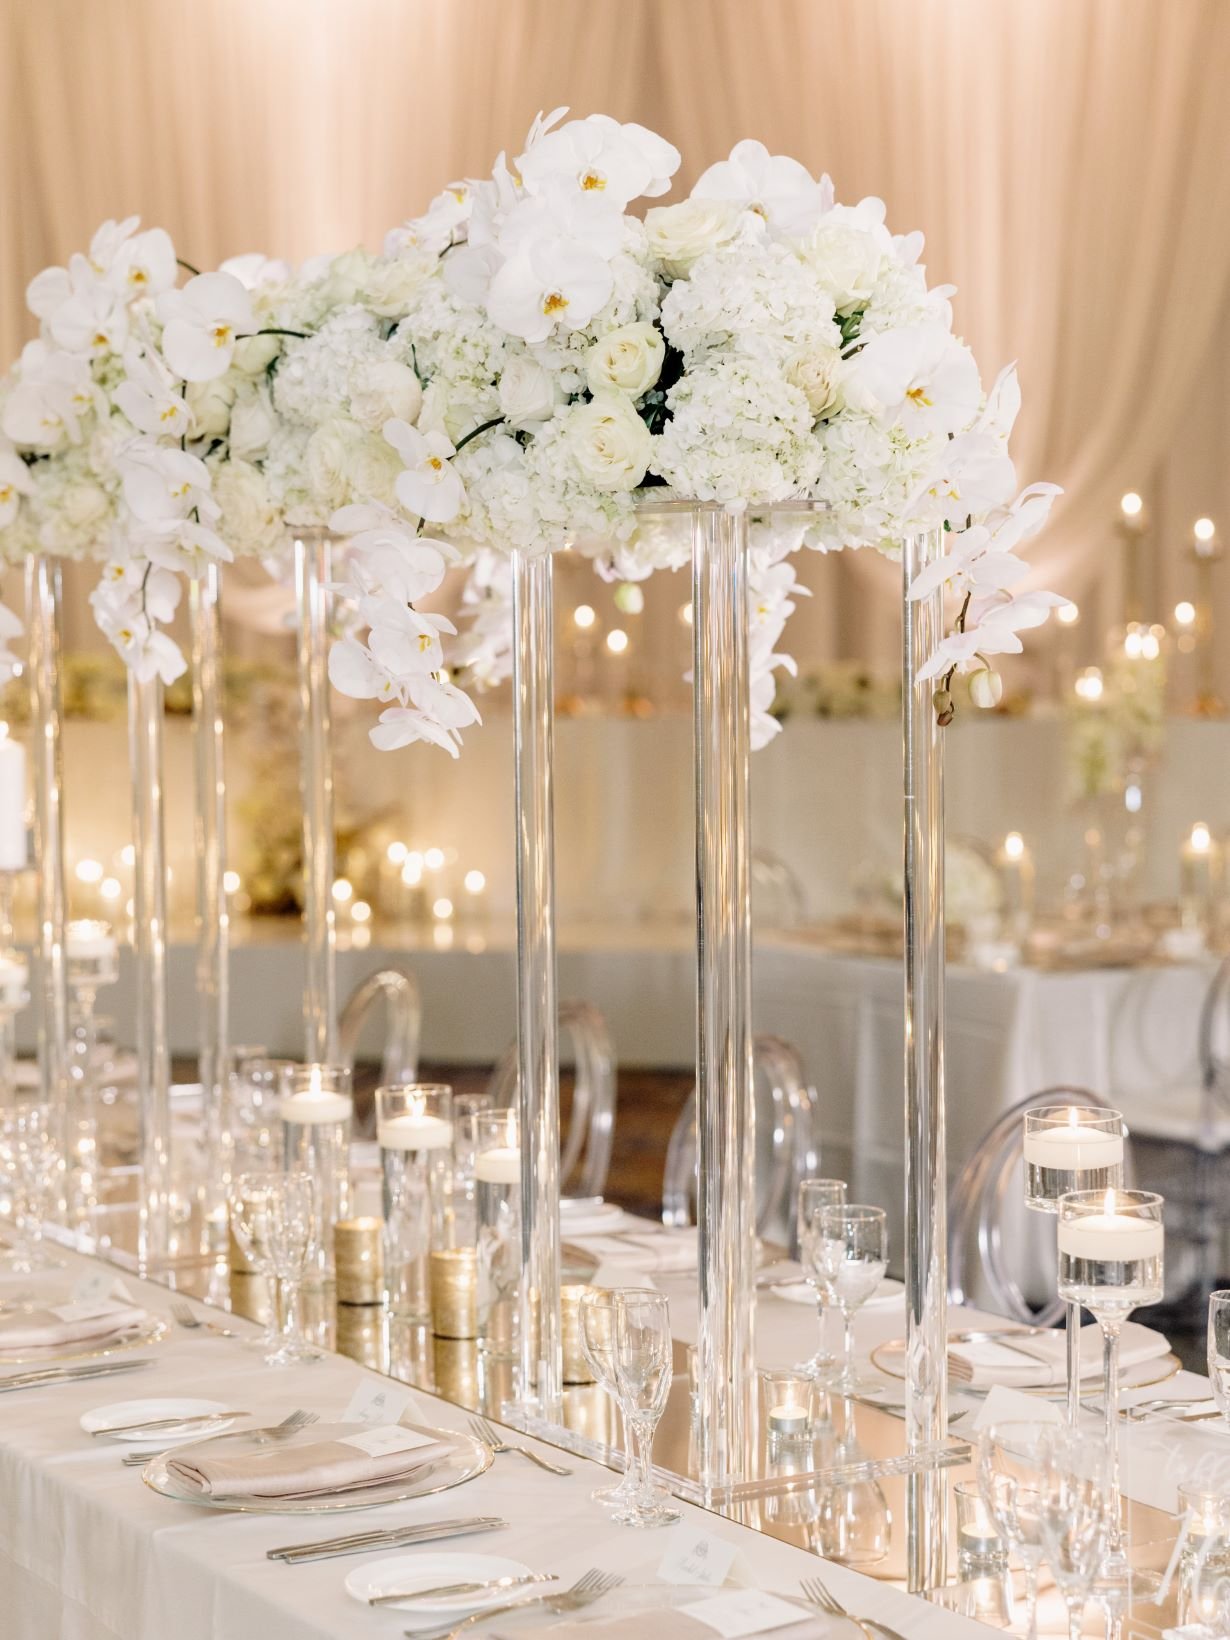 How to Prep and Care for Your Special Event Flowers - Cascade